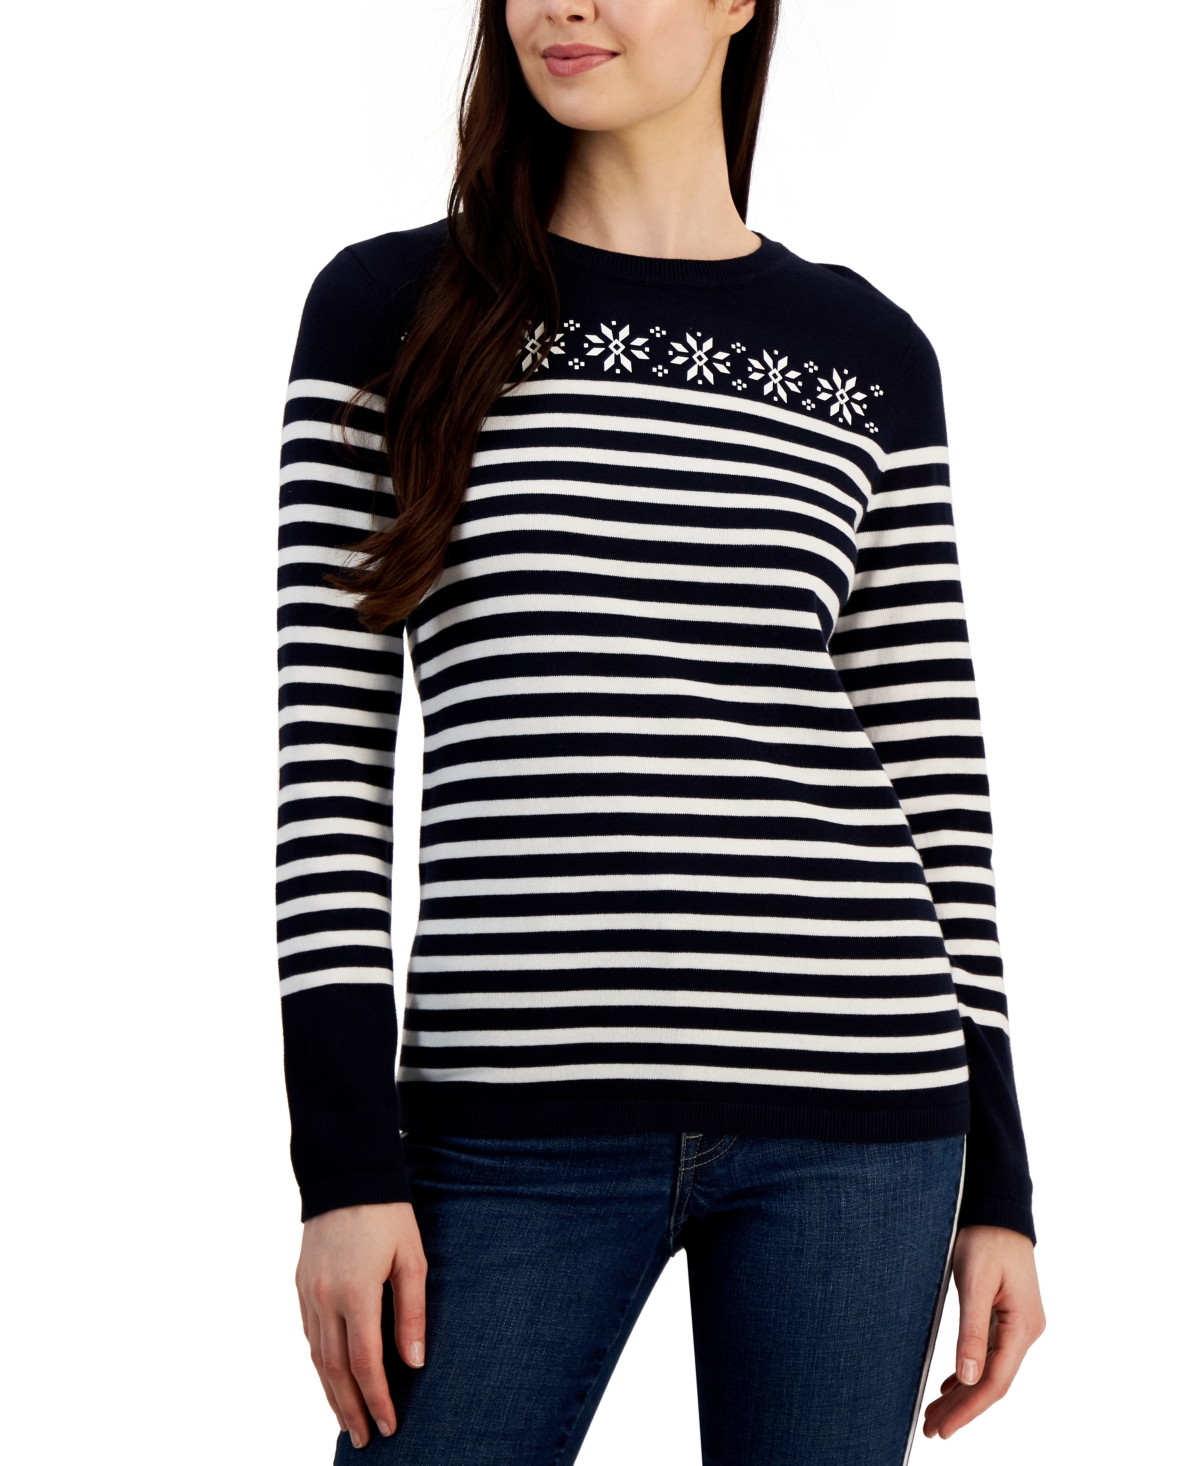 Tommy Hilfiger Women's Striped Printed Cotton Snowflake Sweater